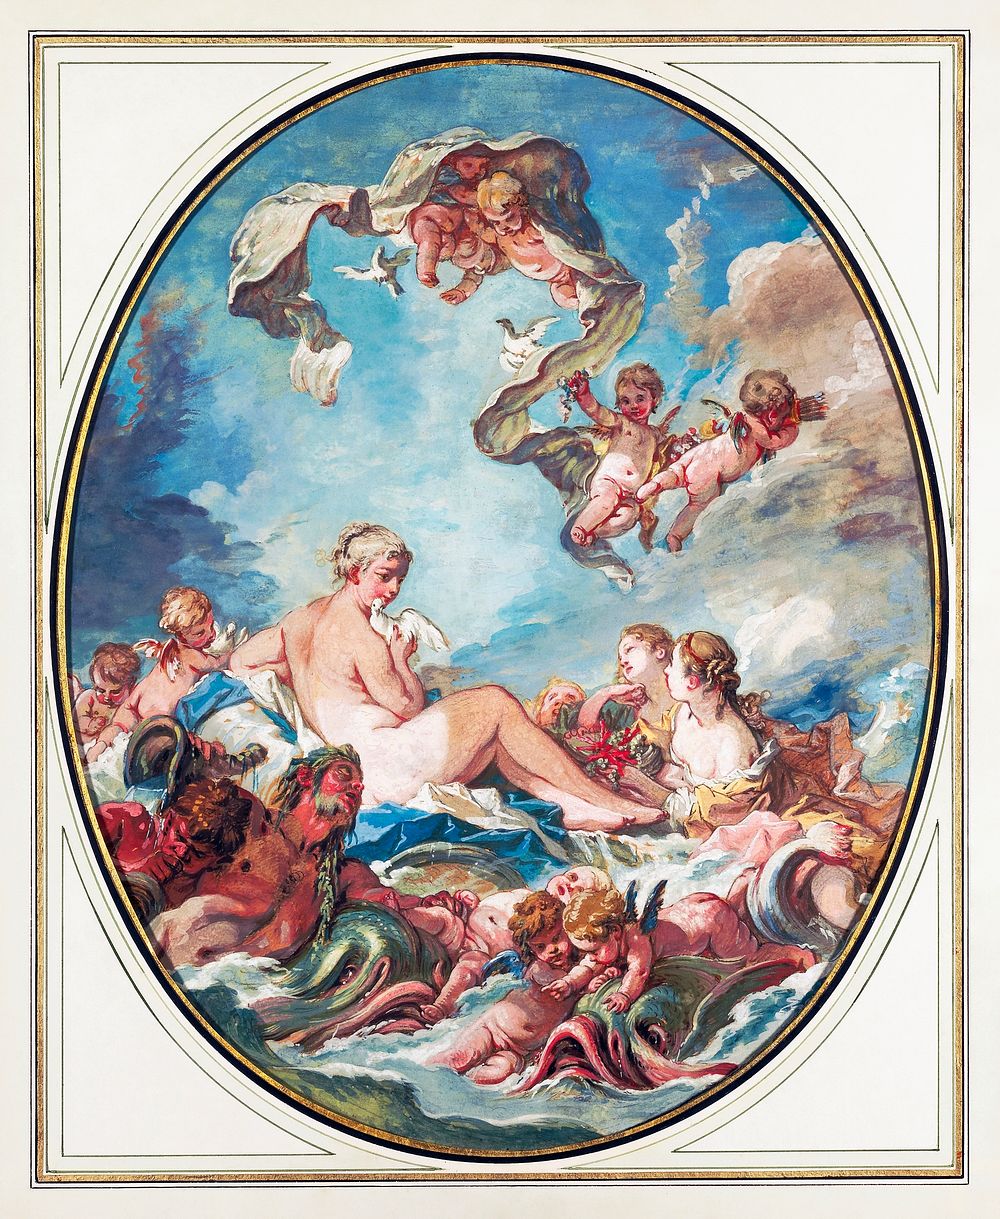 Francois Boucher's The Birth and Triumph of Venus (1743) famous painting. Original from The Getty. Digitally enhanced by…